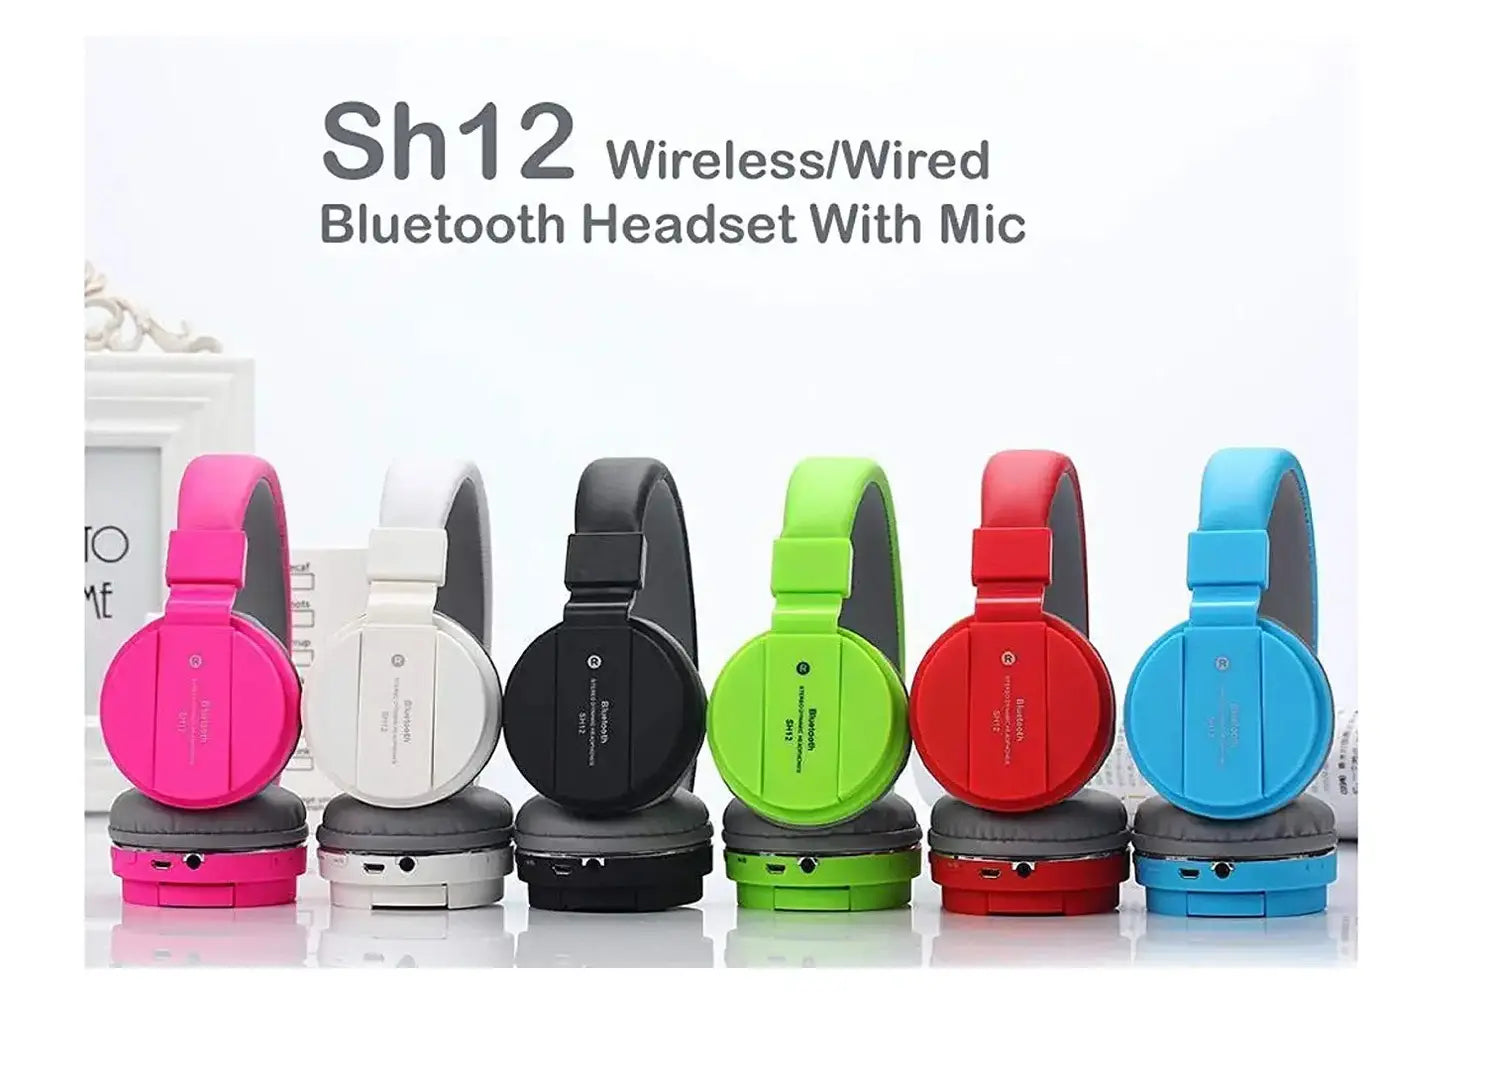 Stylish Multicoloured In-ear Bluetooth Wireless Headphones With Microphone